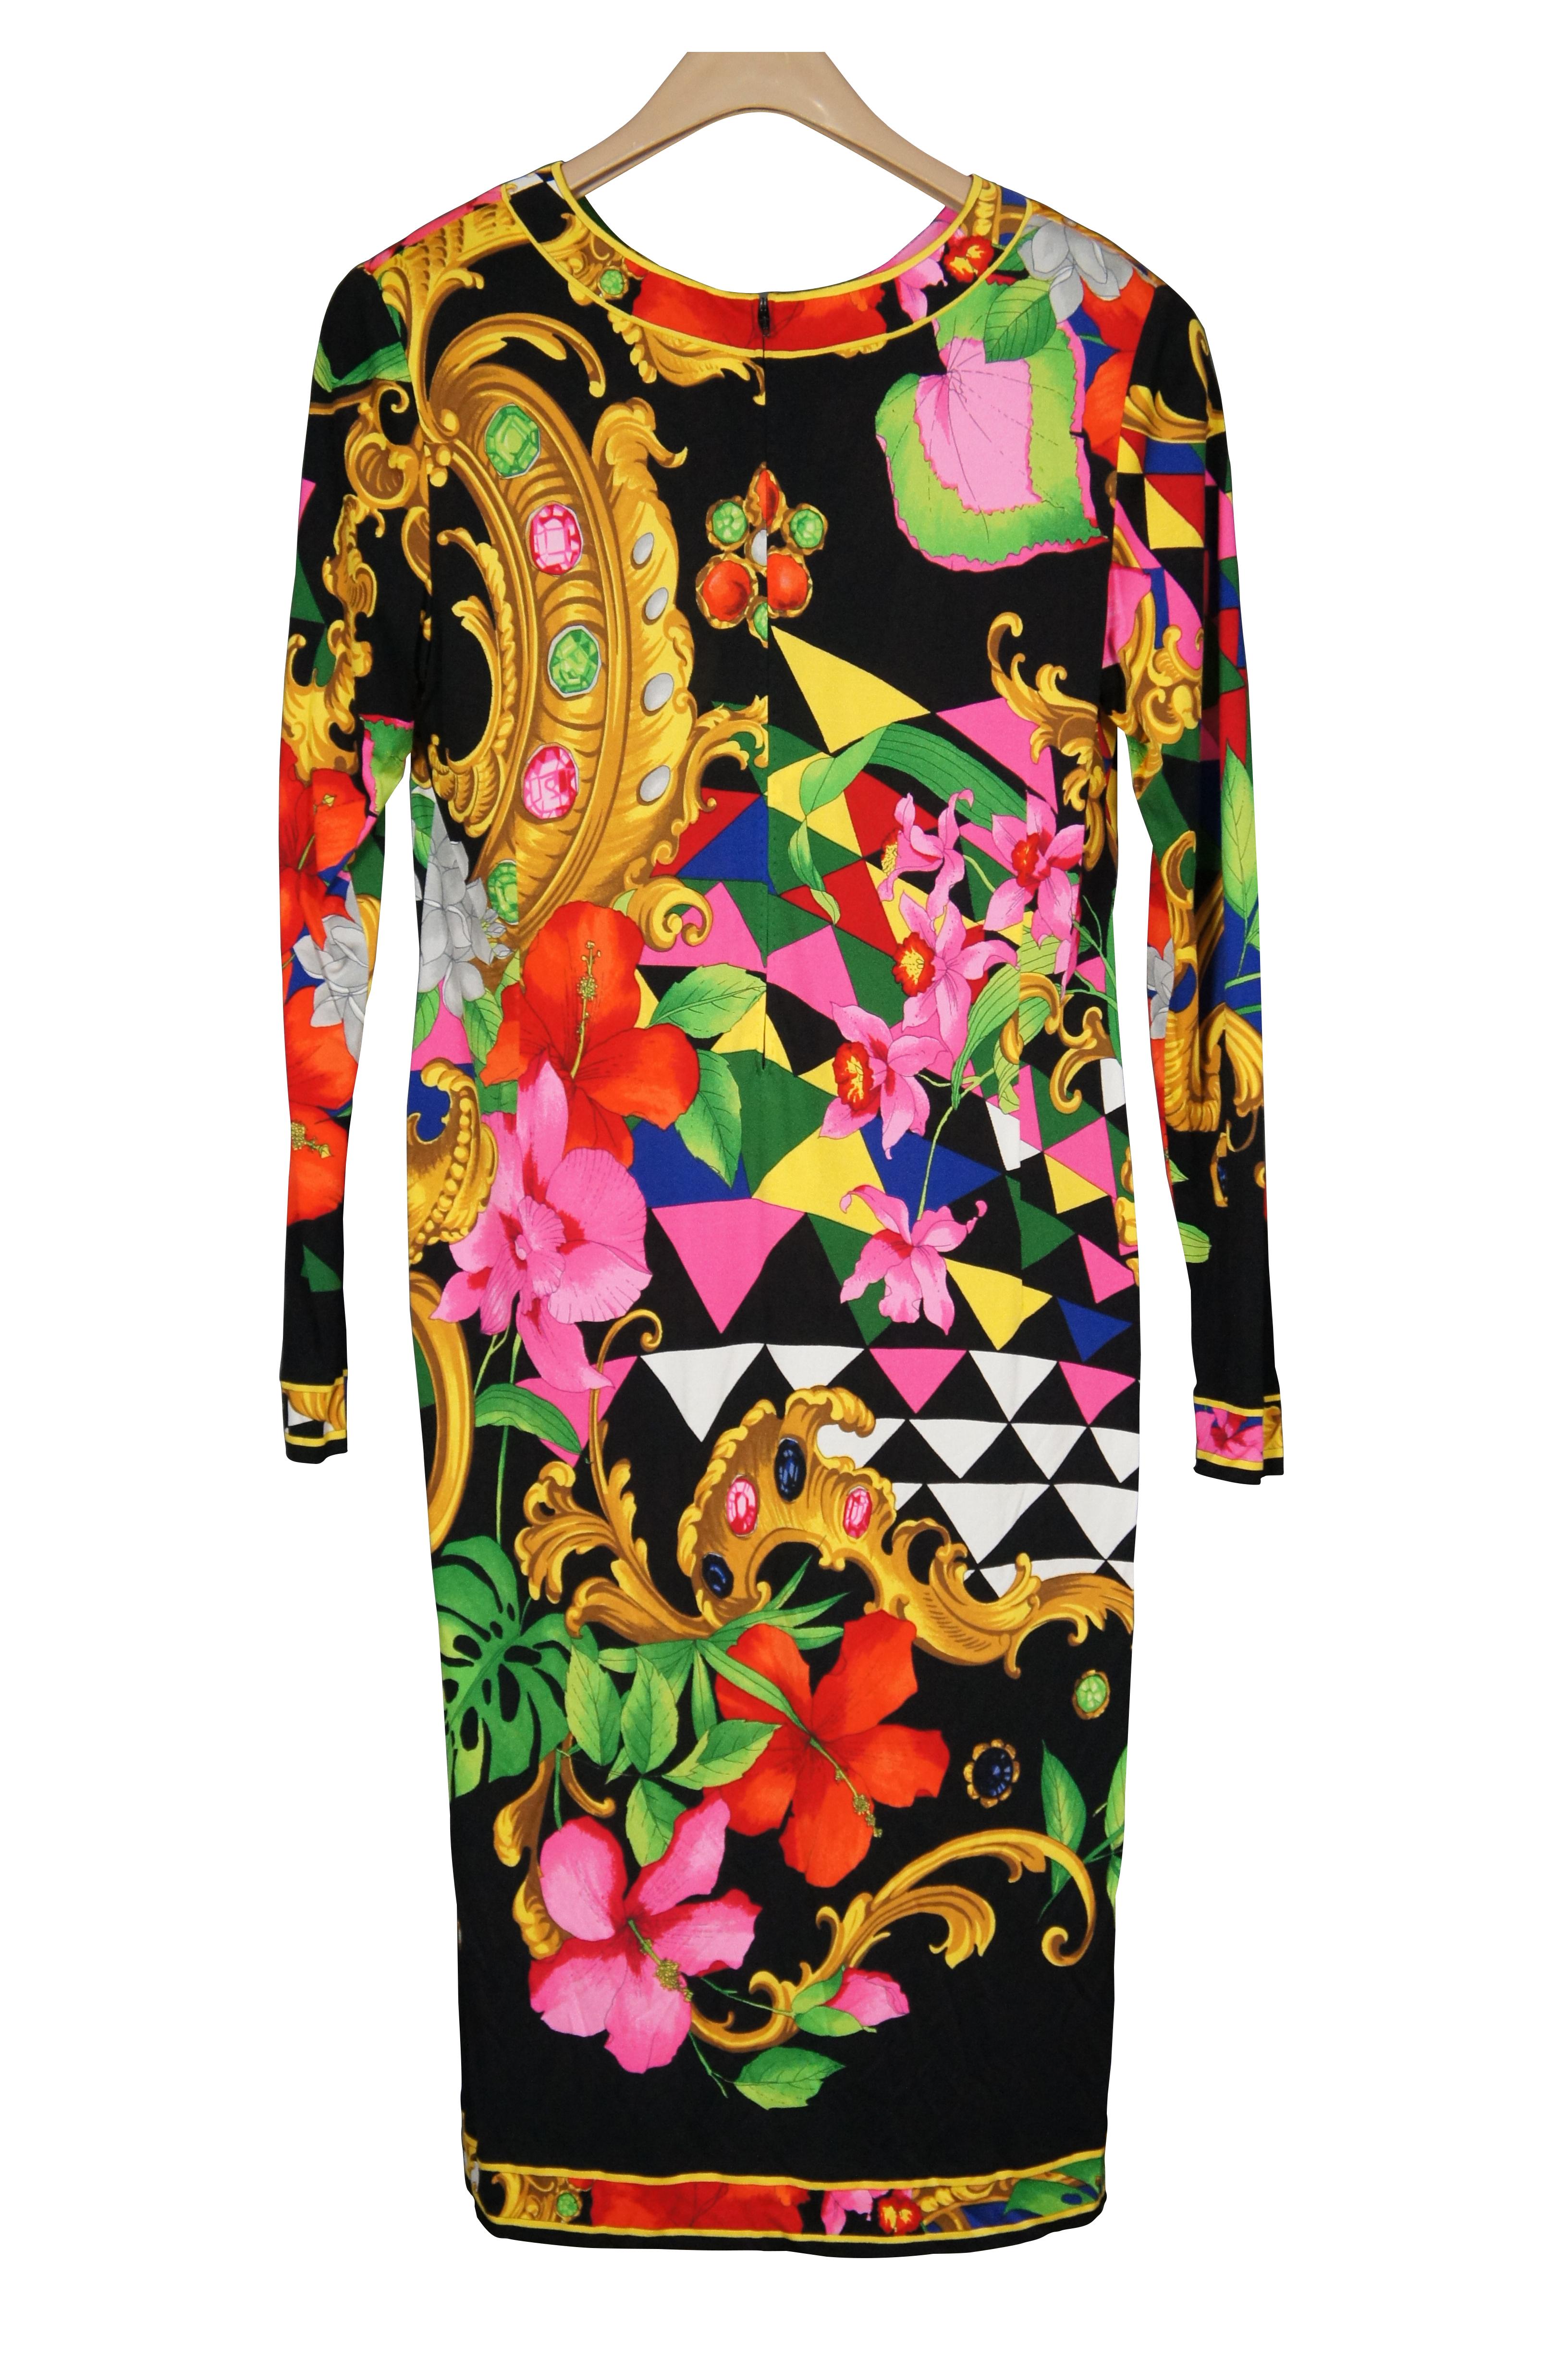 Vintage 1980s Leonard Paris Jersey Mikado silk long sleeve dress featuring a floral design of exotic flowers / foliage, checkerboard and golden foilate. Partial zip closure at back.


Size 2 / Shoulders – 16” / Arm Length – 24.5” / Chest – 32” /